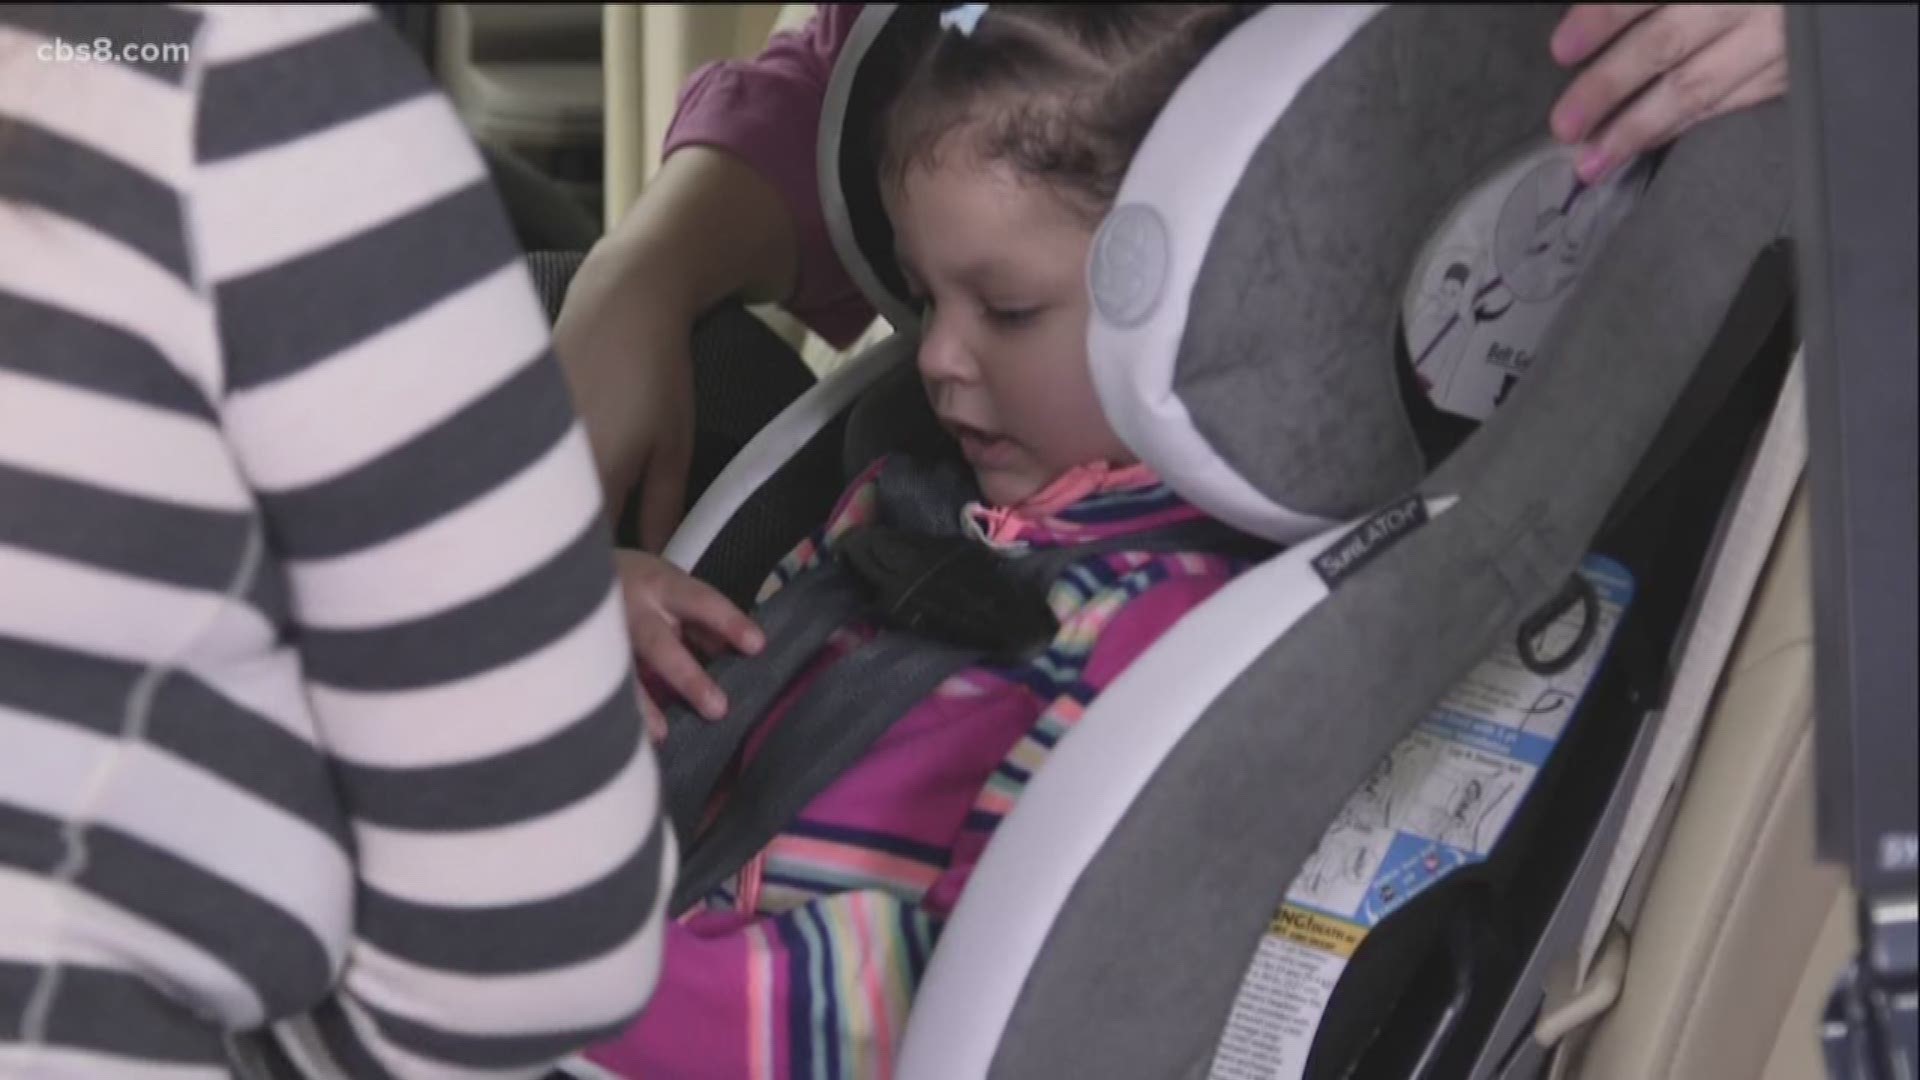 Parents, you may be surprised to find out that many of you are making mistakes when it comes to installing car seats. Check out these sites for more on car seat safety tips go to, www.buckleupforlife.org or www.psc411.com.